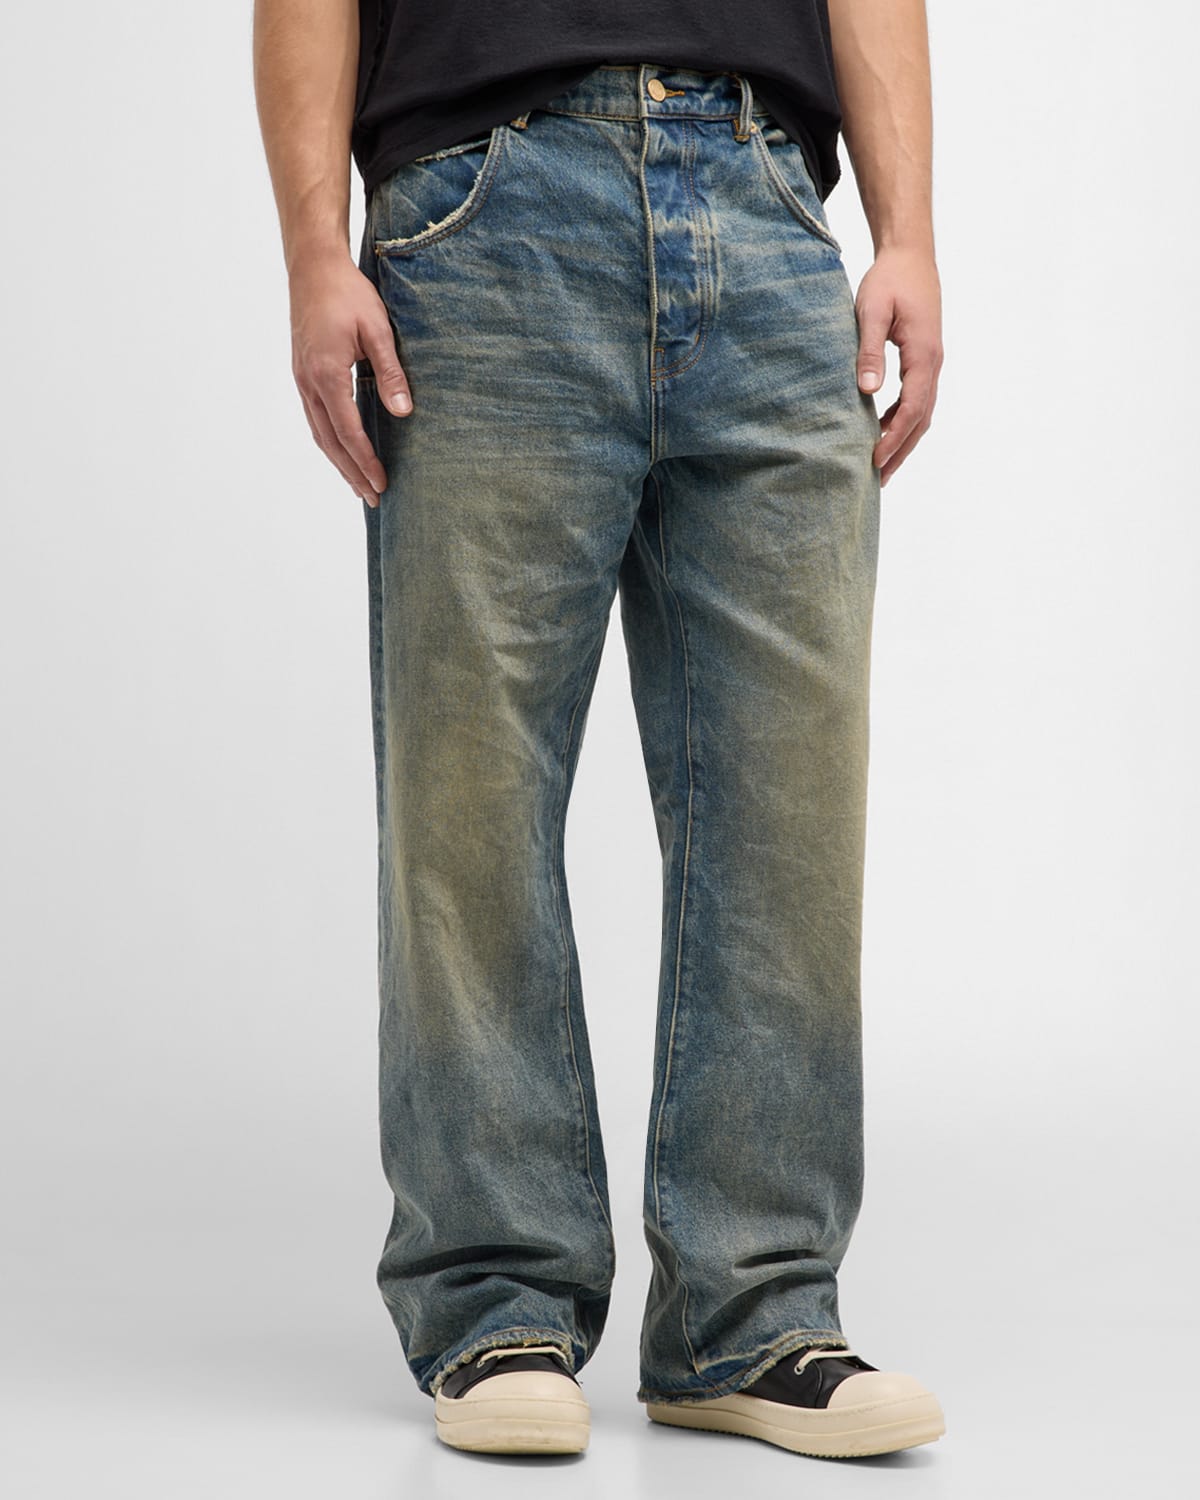 Men's P018 Vintage Dirty Relaxed Jeans